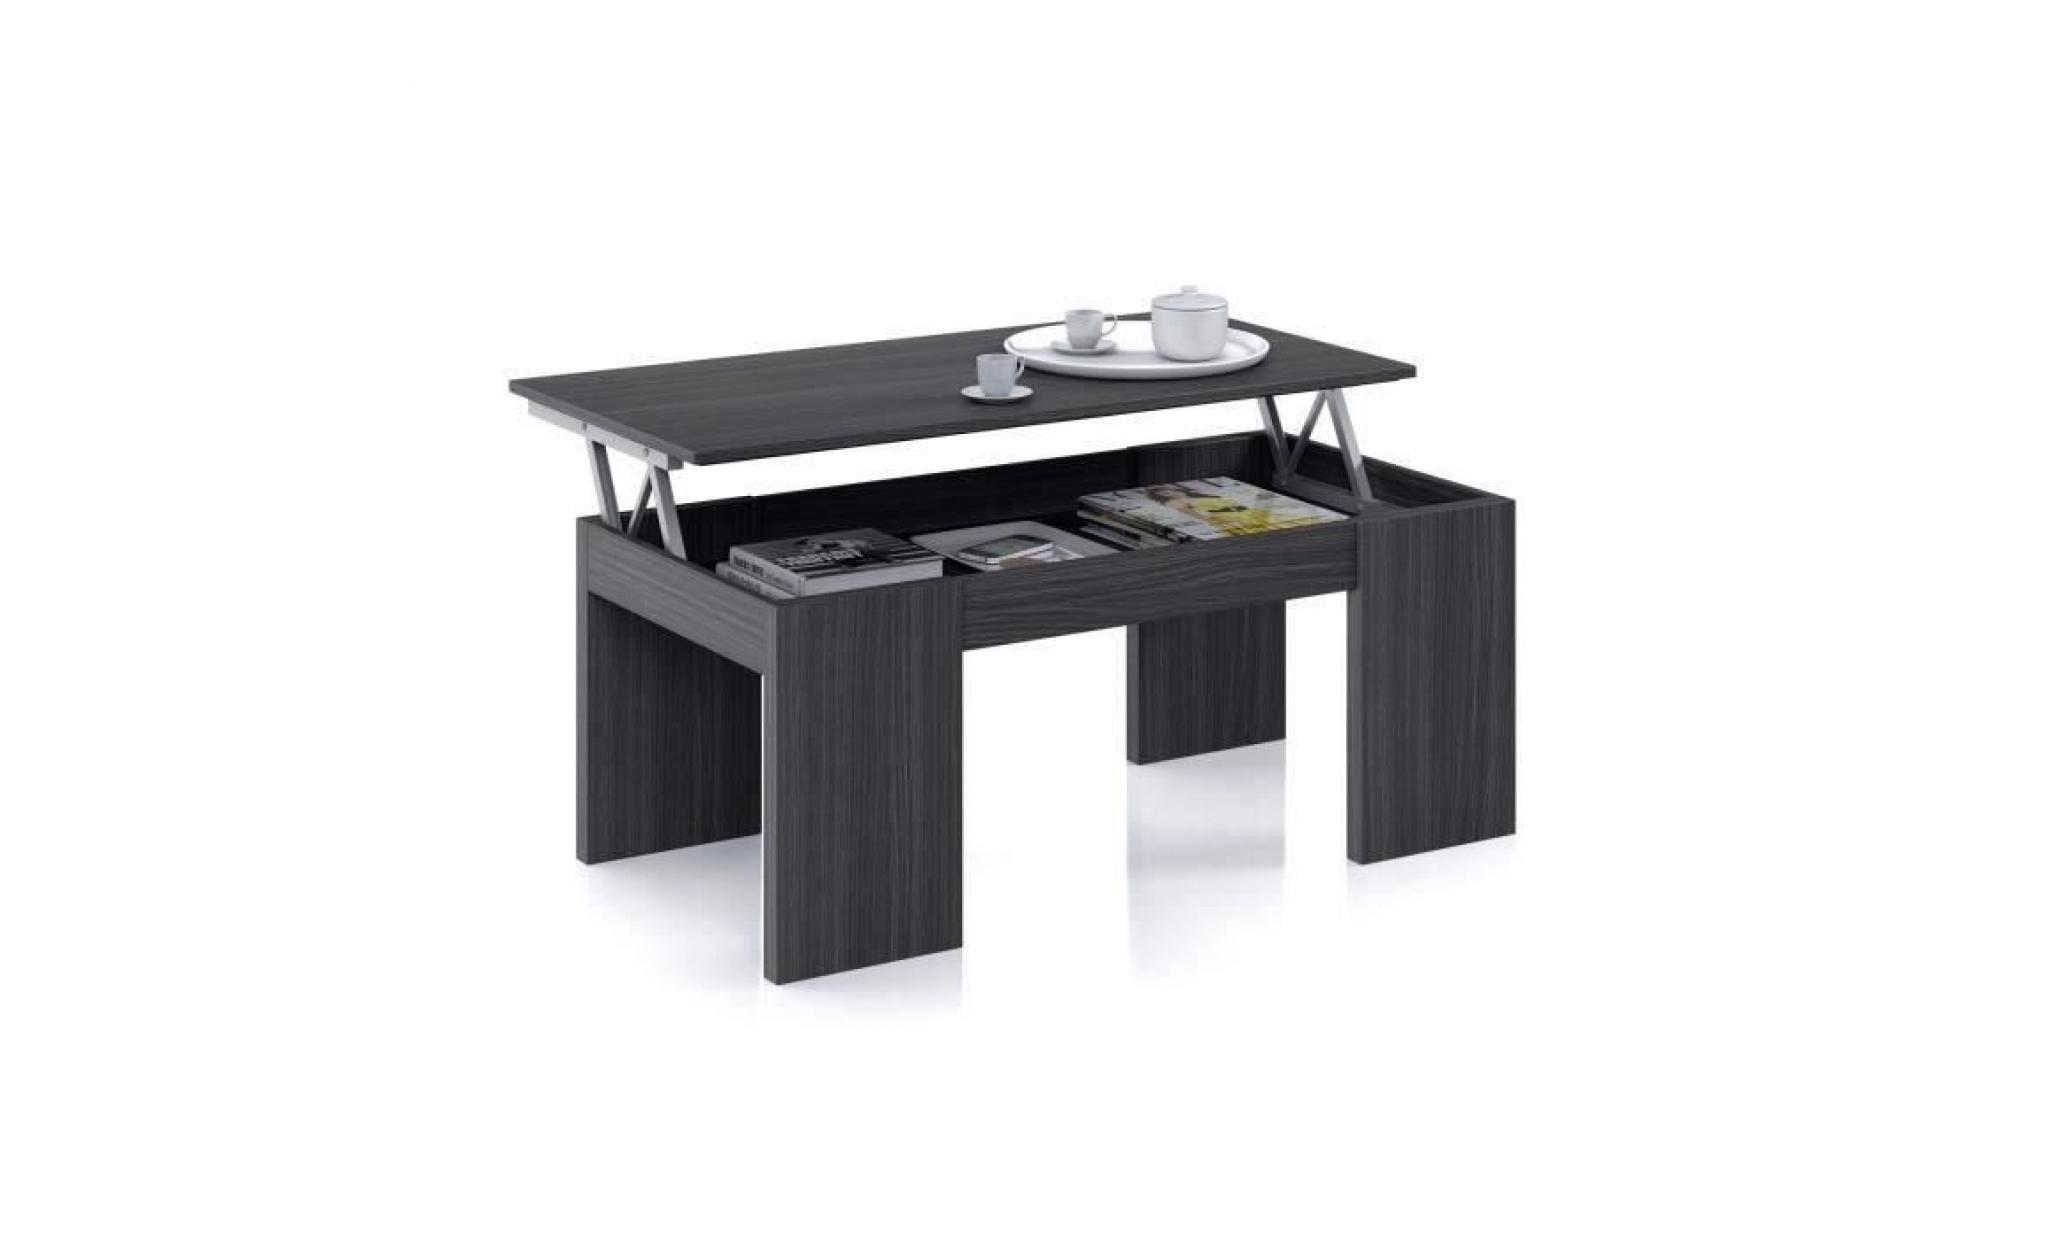 kendra table basse grise transformable, plateau relevable